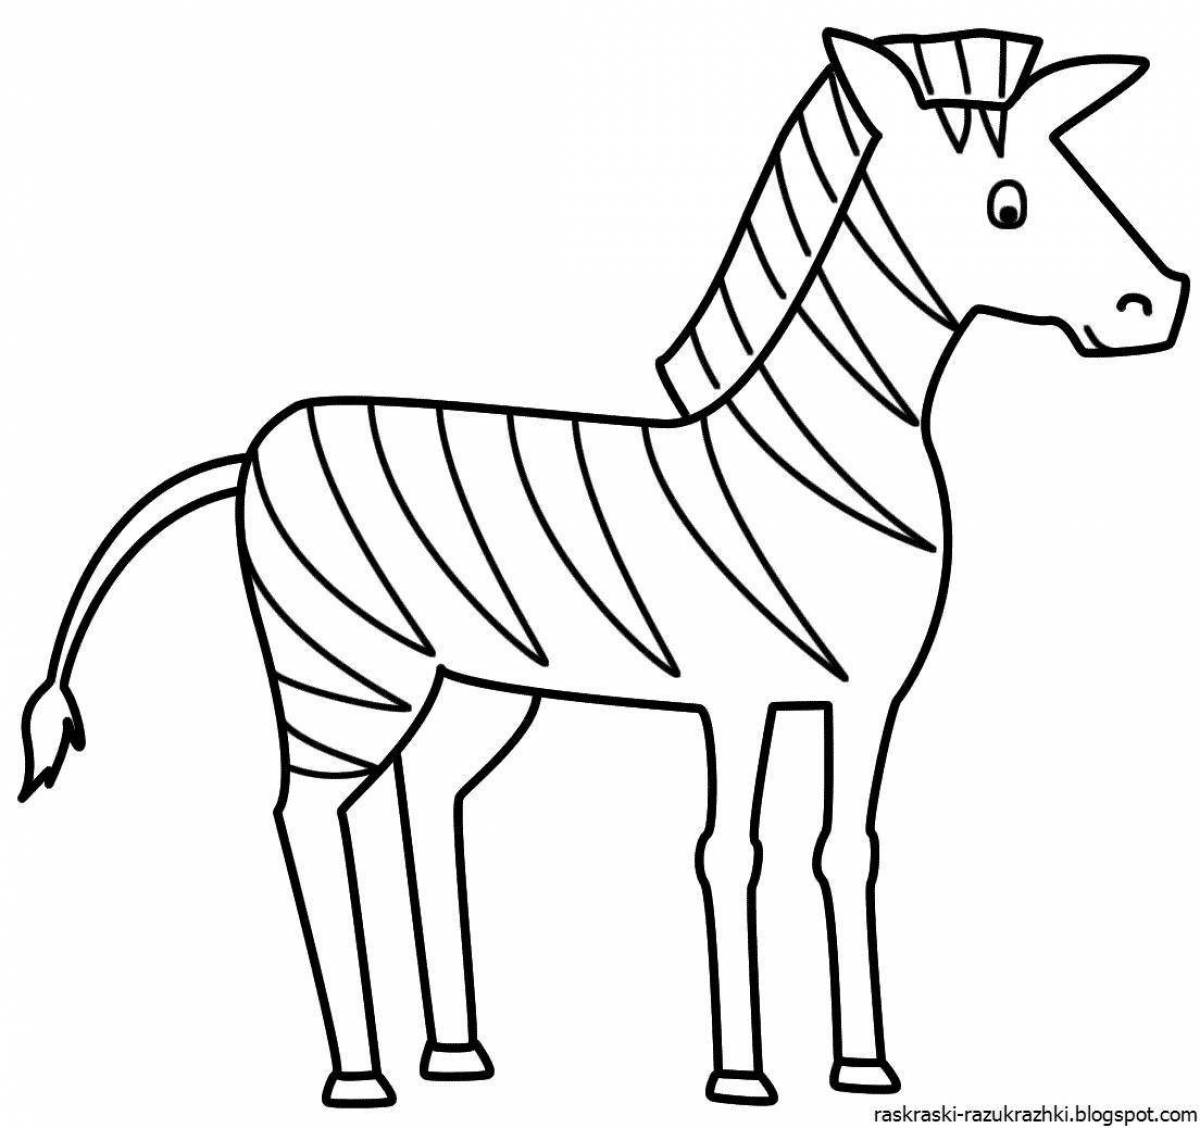 Coloring book bright zebra for preschoolers 3-4 years old